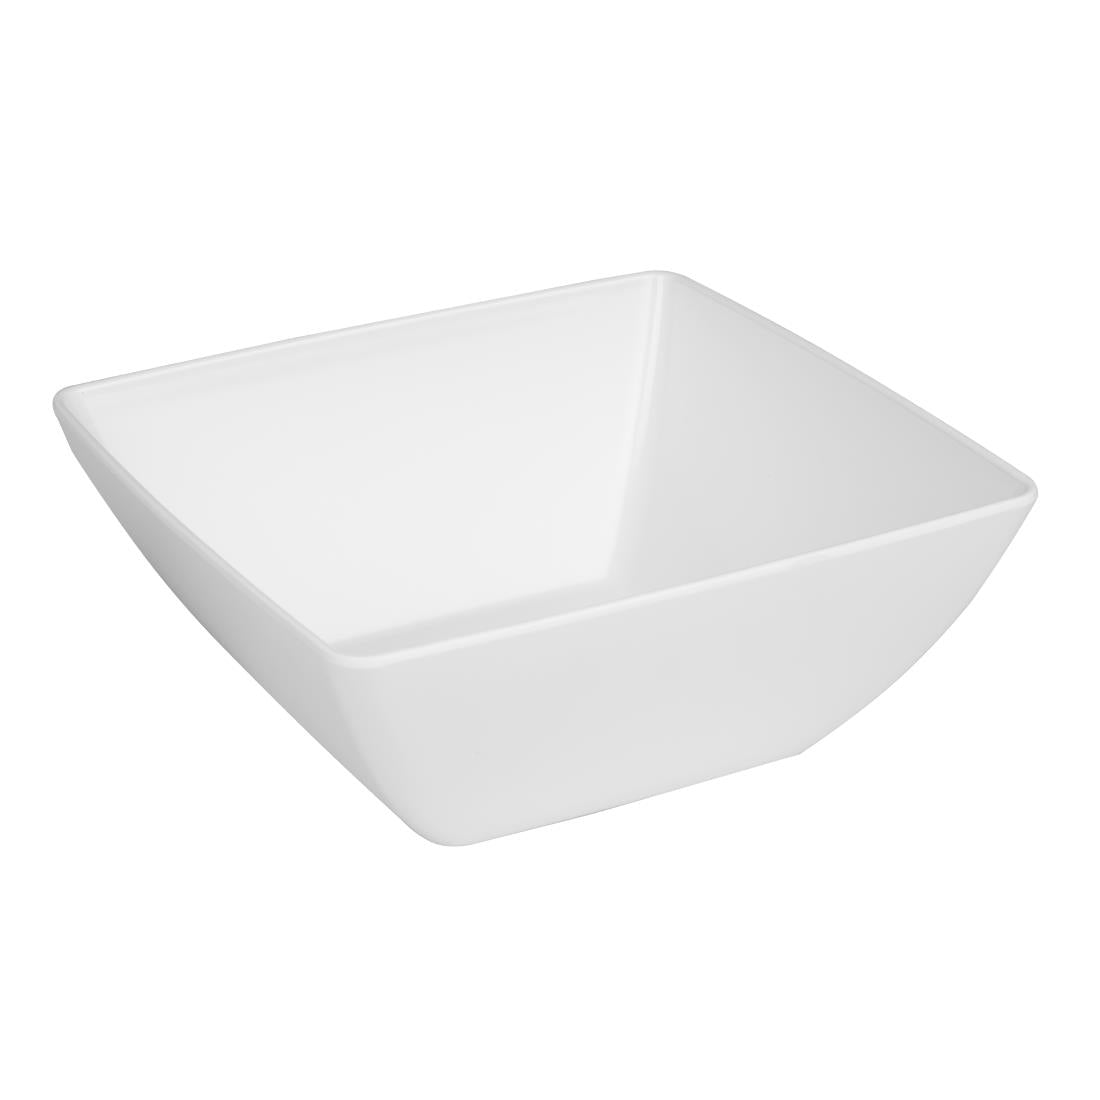 DP145 Curved White Melamine Bowl 11in JD Catering Equipment Solutions Ltd